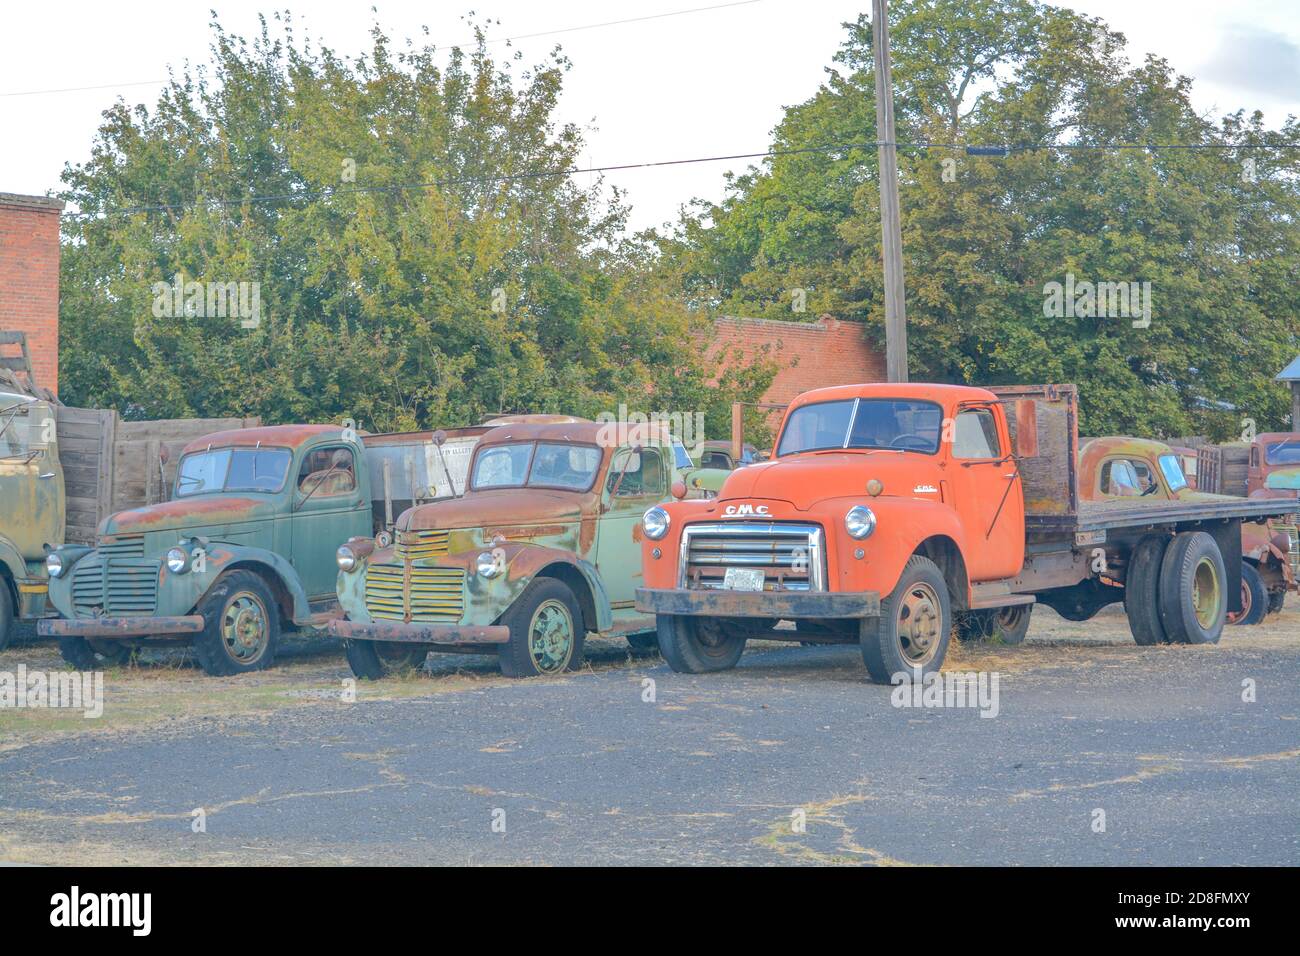 A collection of antique trucks ready to be restored in Sprague, Washington Stock Photo